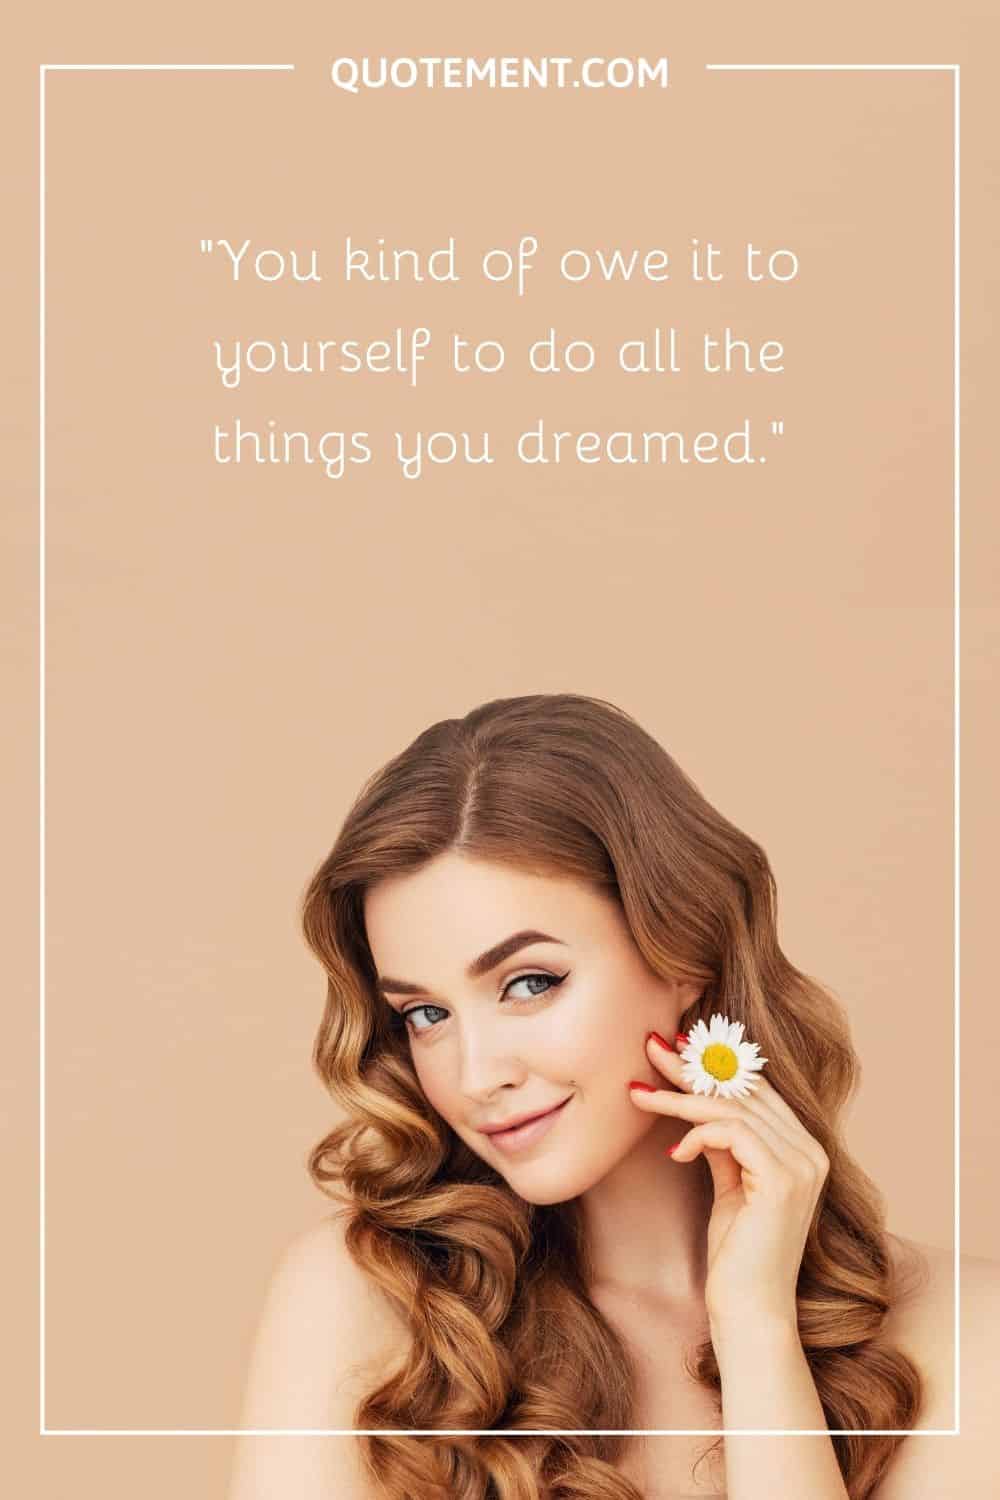 You kind of owe it to yourself to do all the things you dreamed.